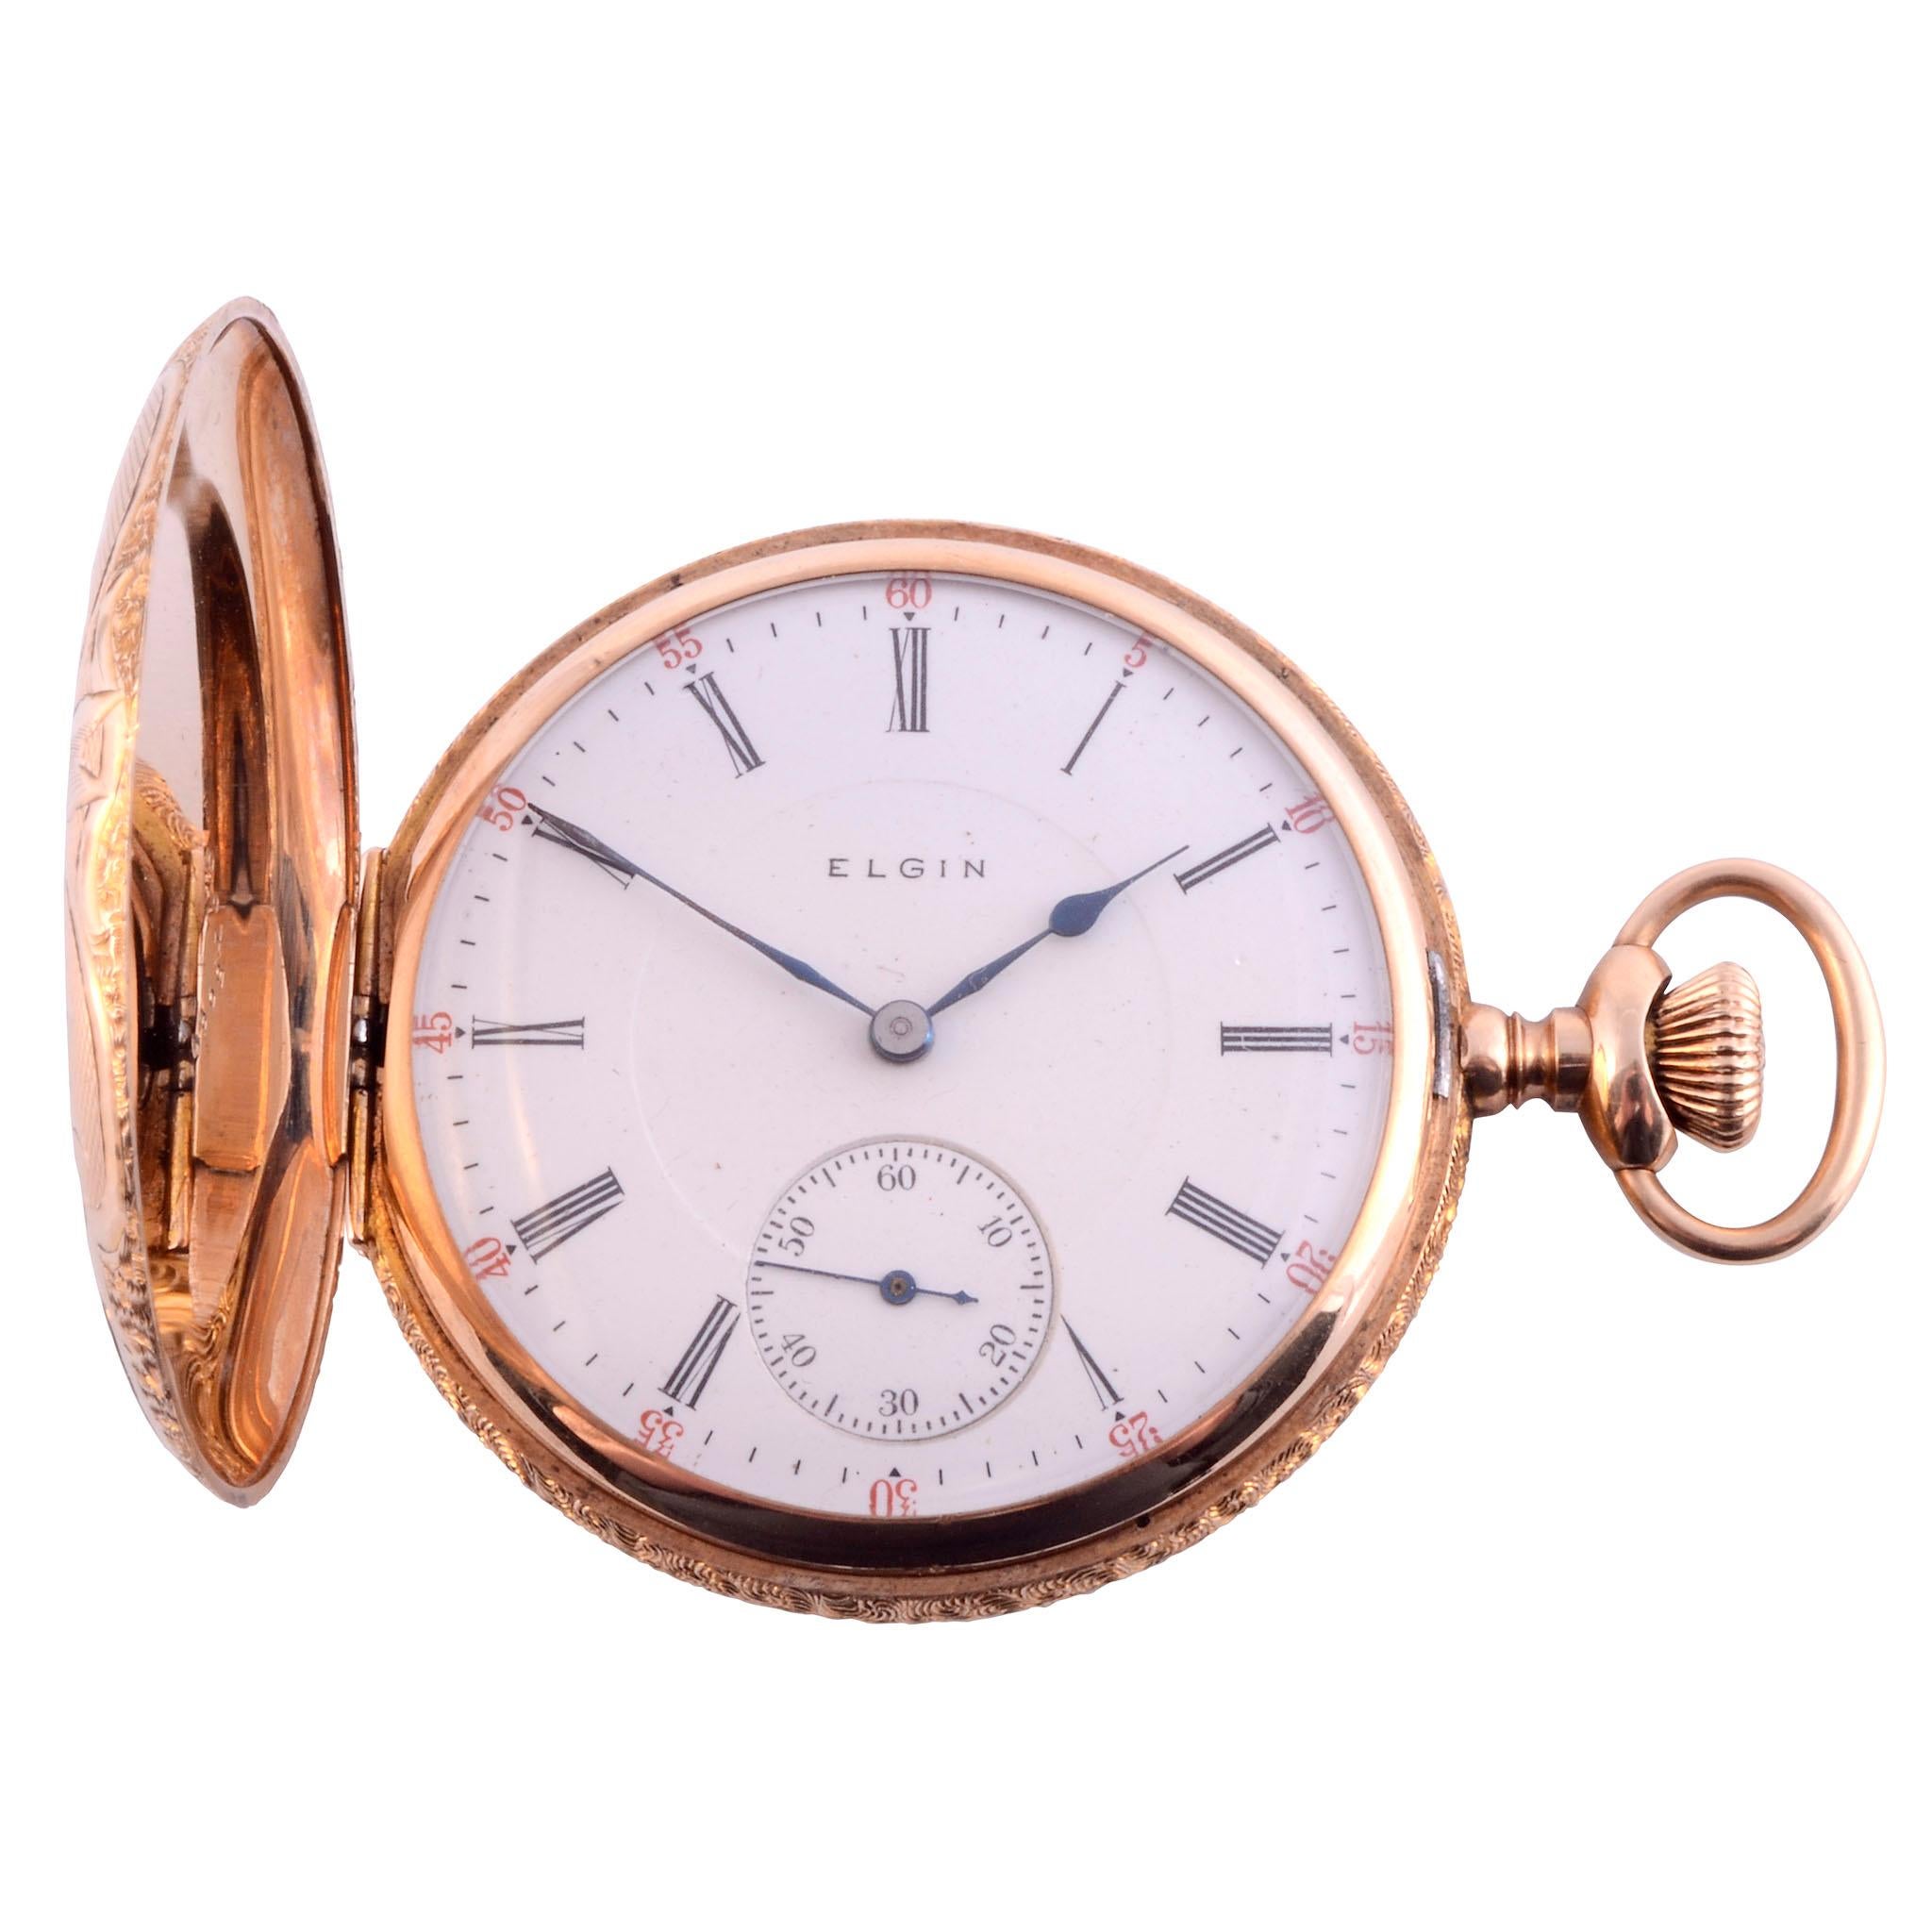 Antique American Elgin size 16 hunter case 14K gold pocket watch, circa 1898. This antique pocket watch is crafted in heavy 14 karat yellow gold by Elgin. The hunter case pocket watch is engraved with a palm tree motif and housed in a leather case.